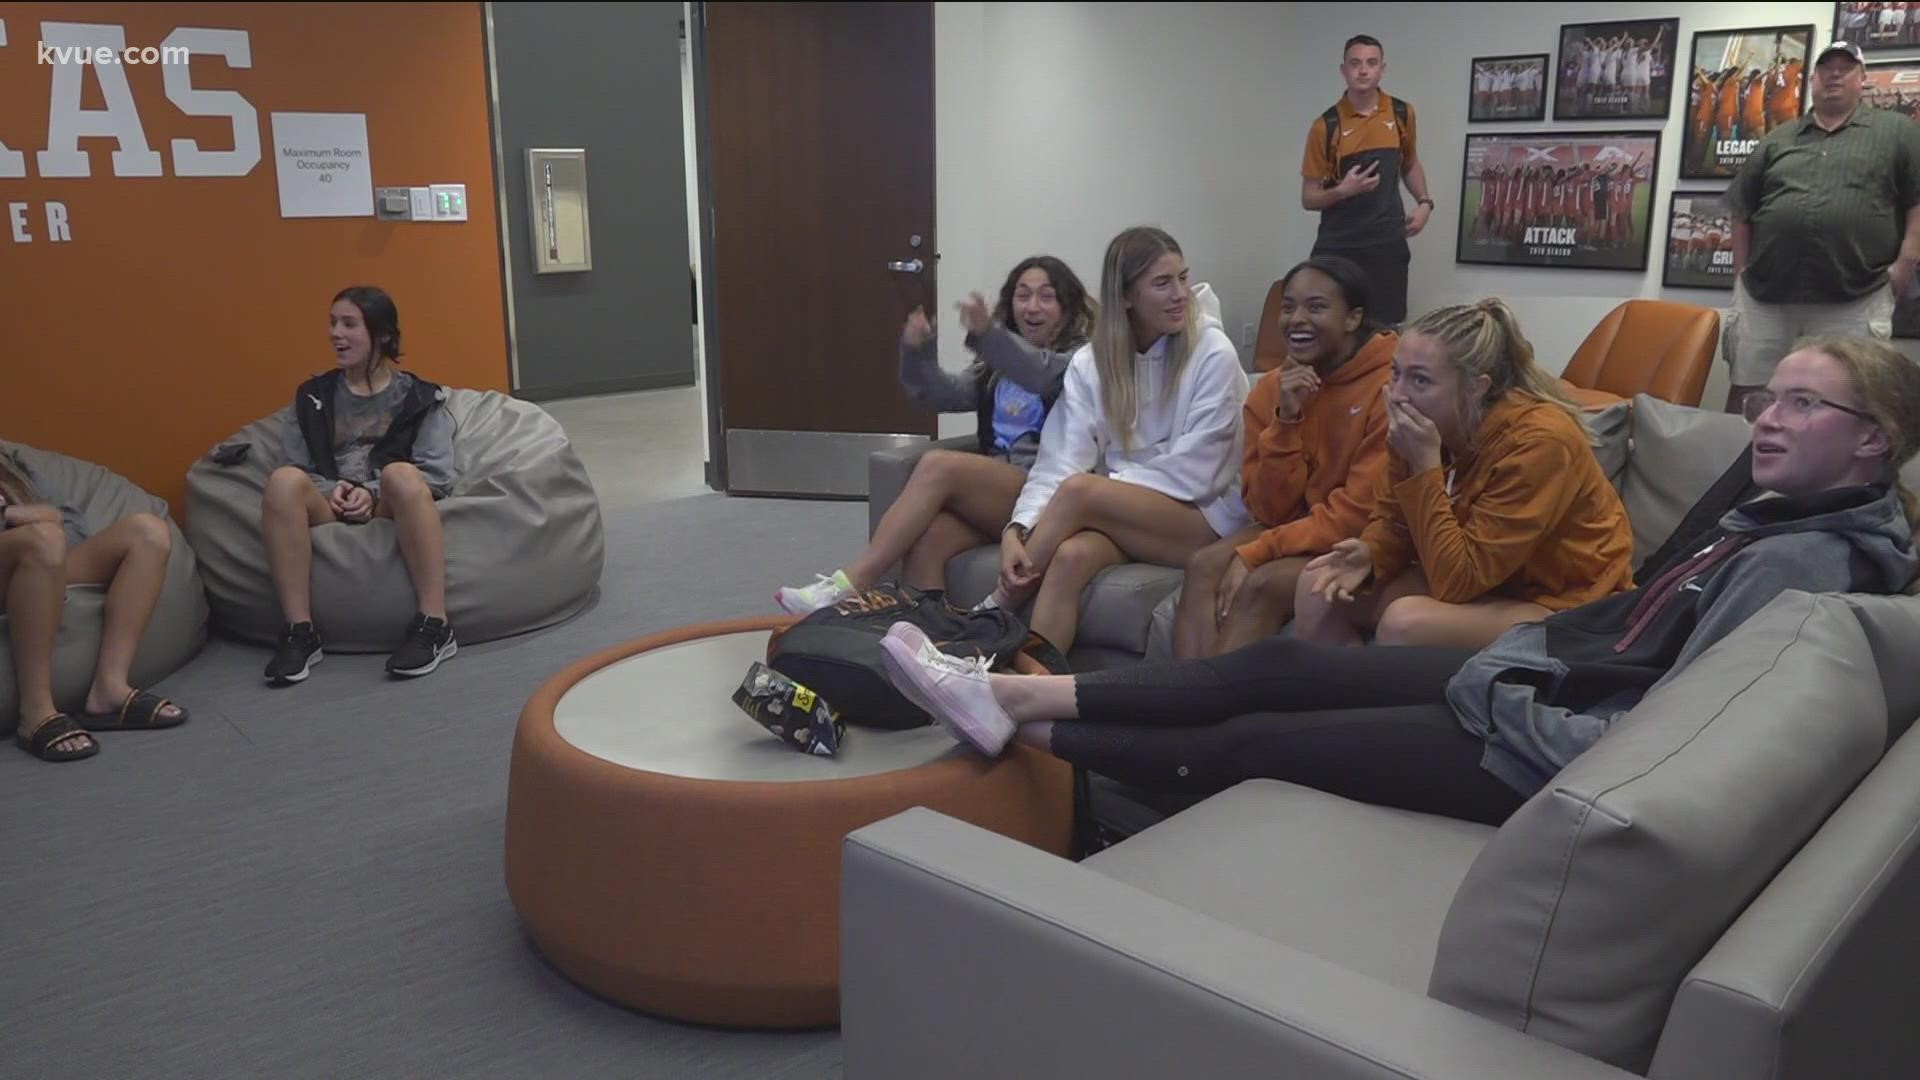 UT's team will open NCAA tournament play against 17th-ranked SMU.